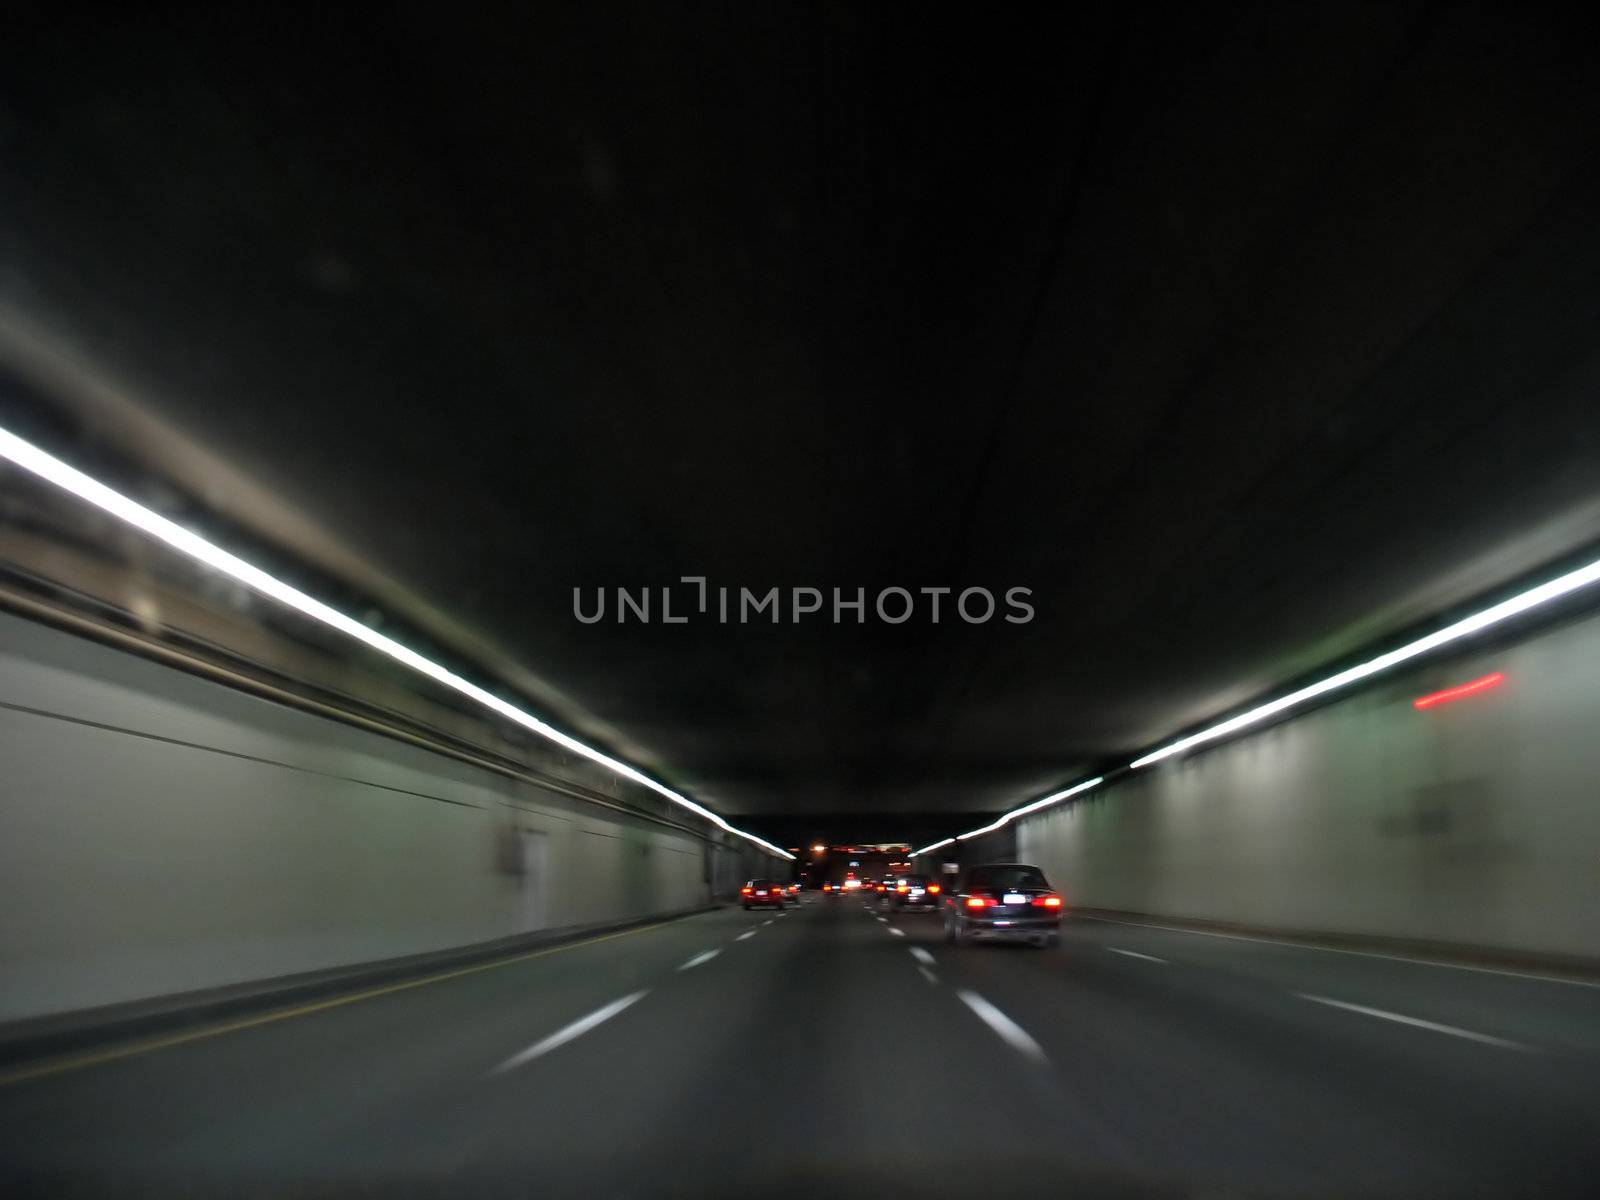 Tunnel at Night by graficallyminded